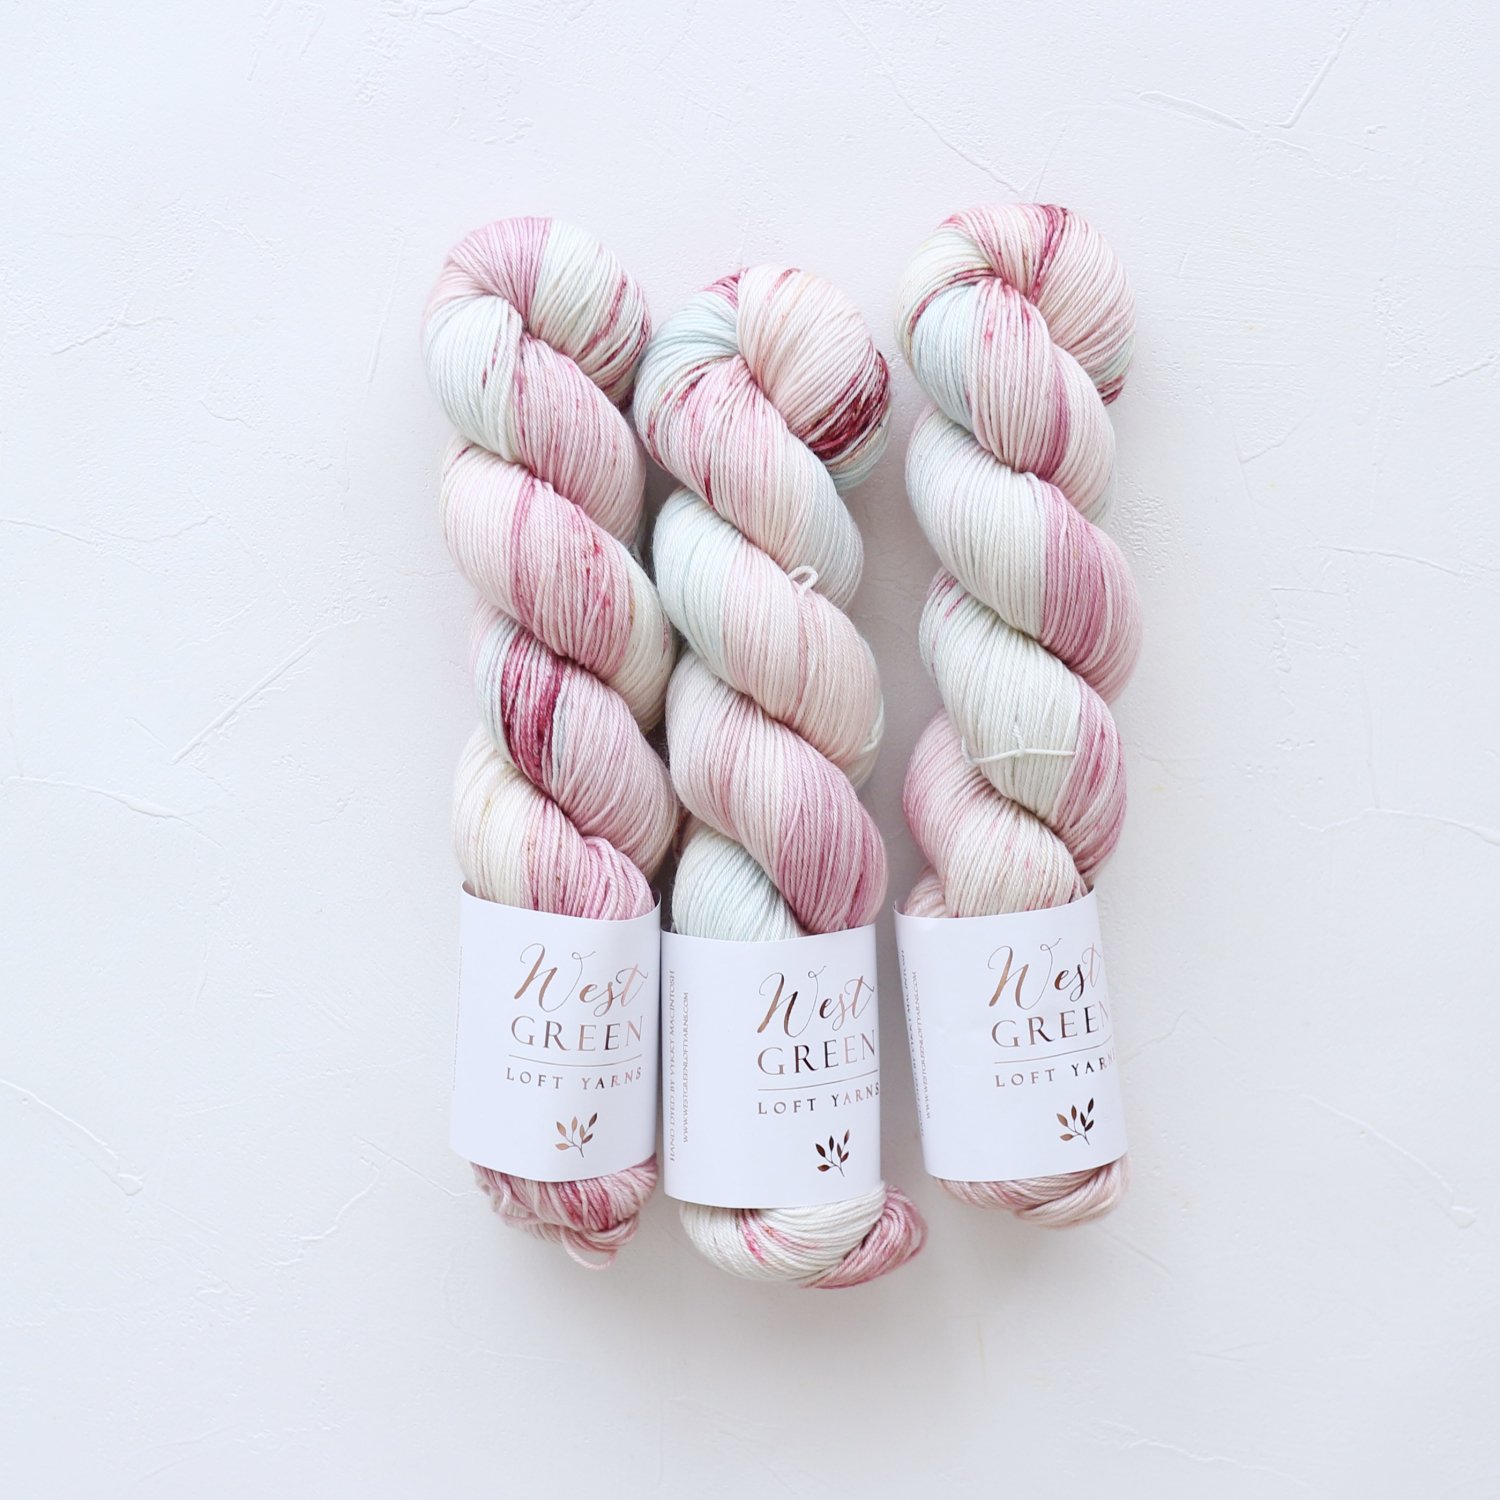 West green loft yarns<br>WGLY SMOOTH<br>I want to go to Brighton!